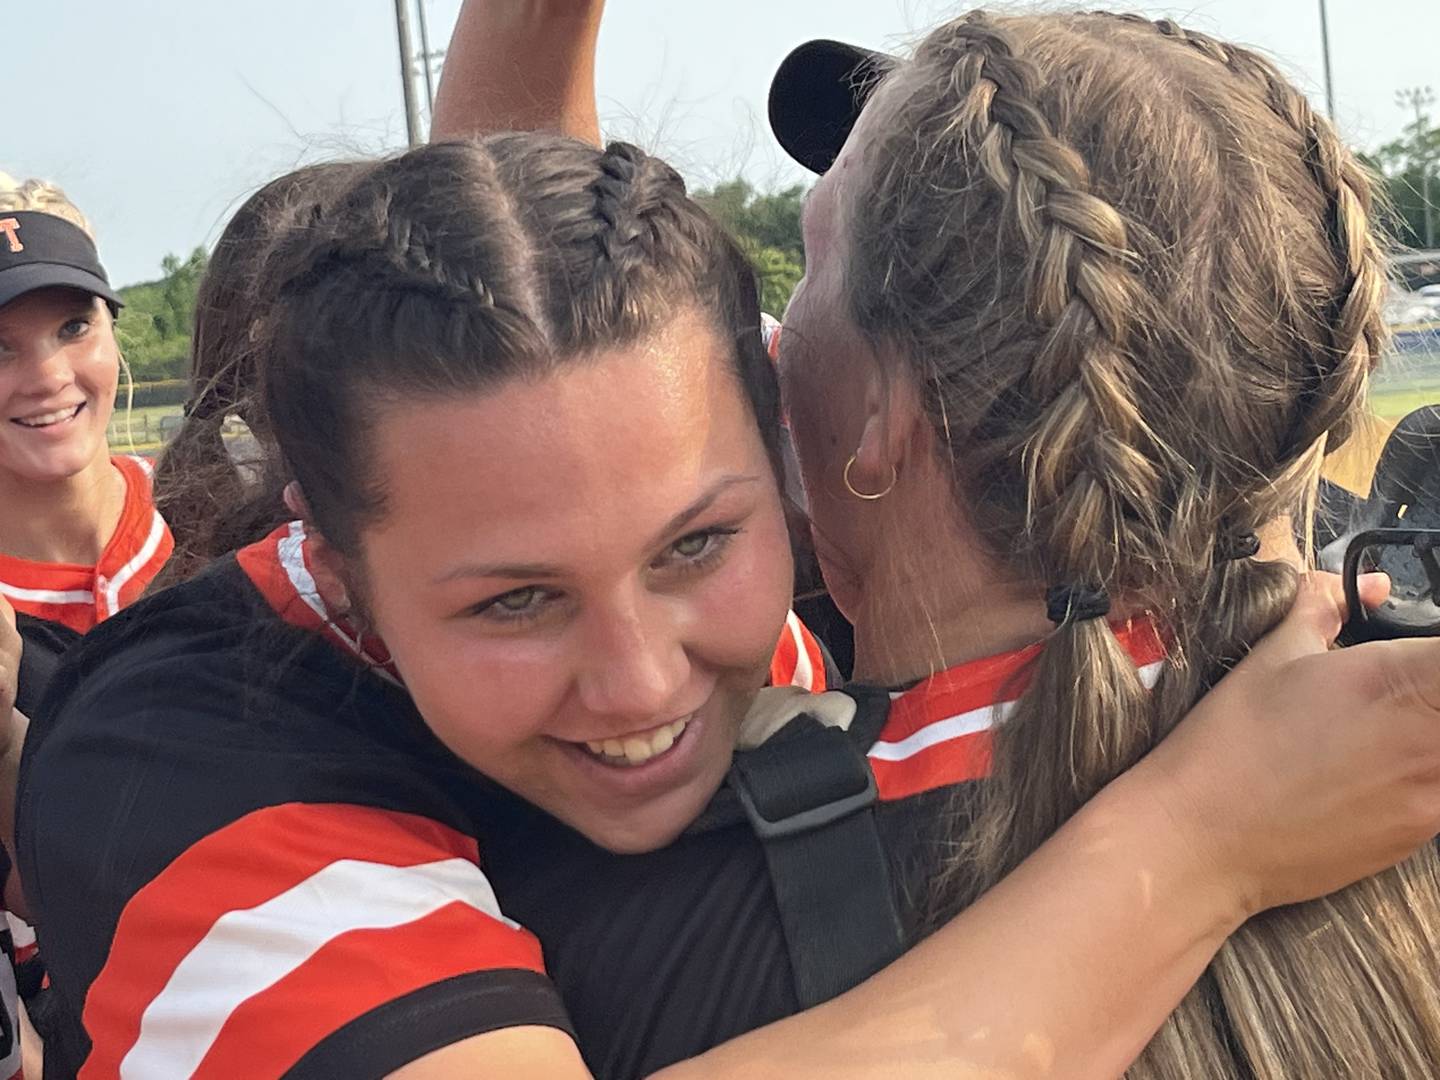 Rising Sun pitcher Cadence Williams hugs catcher Bri Cole after recording the final out in Tuesday's Class 2A state softball semifinal match with Eastern Tech. Williams and combined with senior Faith McCullough on a two-hitter as the No. 4 Tigers advanced to a second straight state final with a 7-0 decision over the 14th-ranked Mavericks at Bachmann Park in Anne Arundel County.